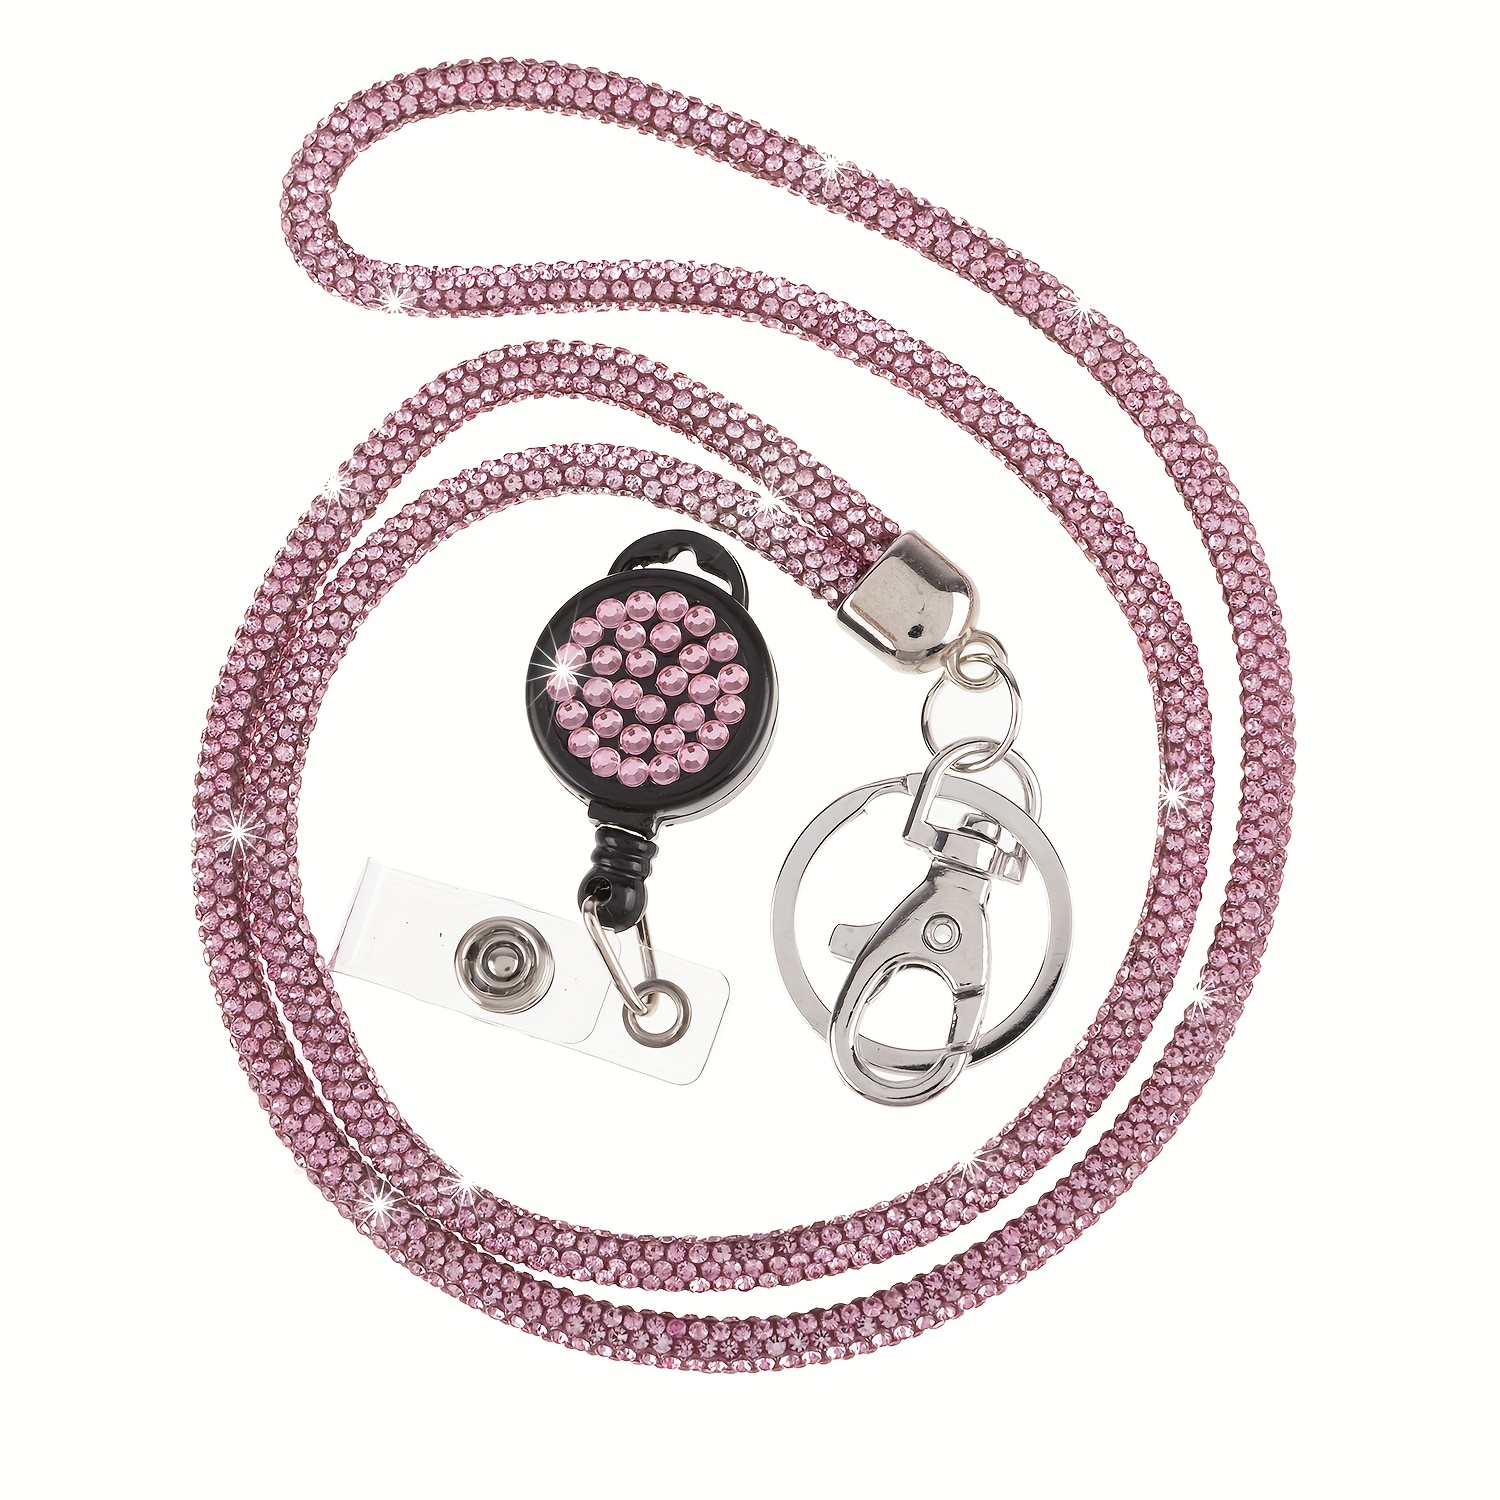 Sparkle and * with this Fashionable * Crystal Rhinestone Neck Lanyard -  Perfect for Women's ID Name Badge Holder!